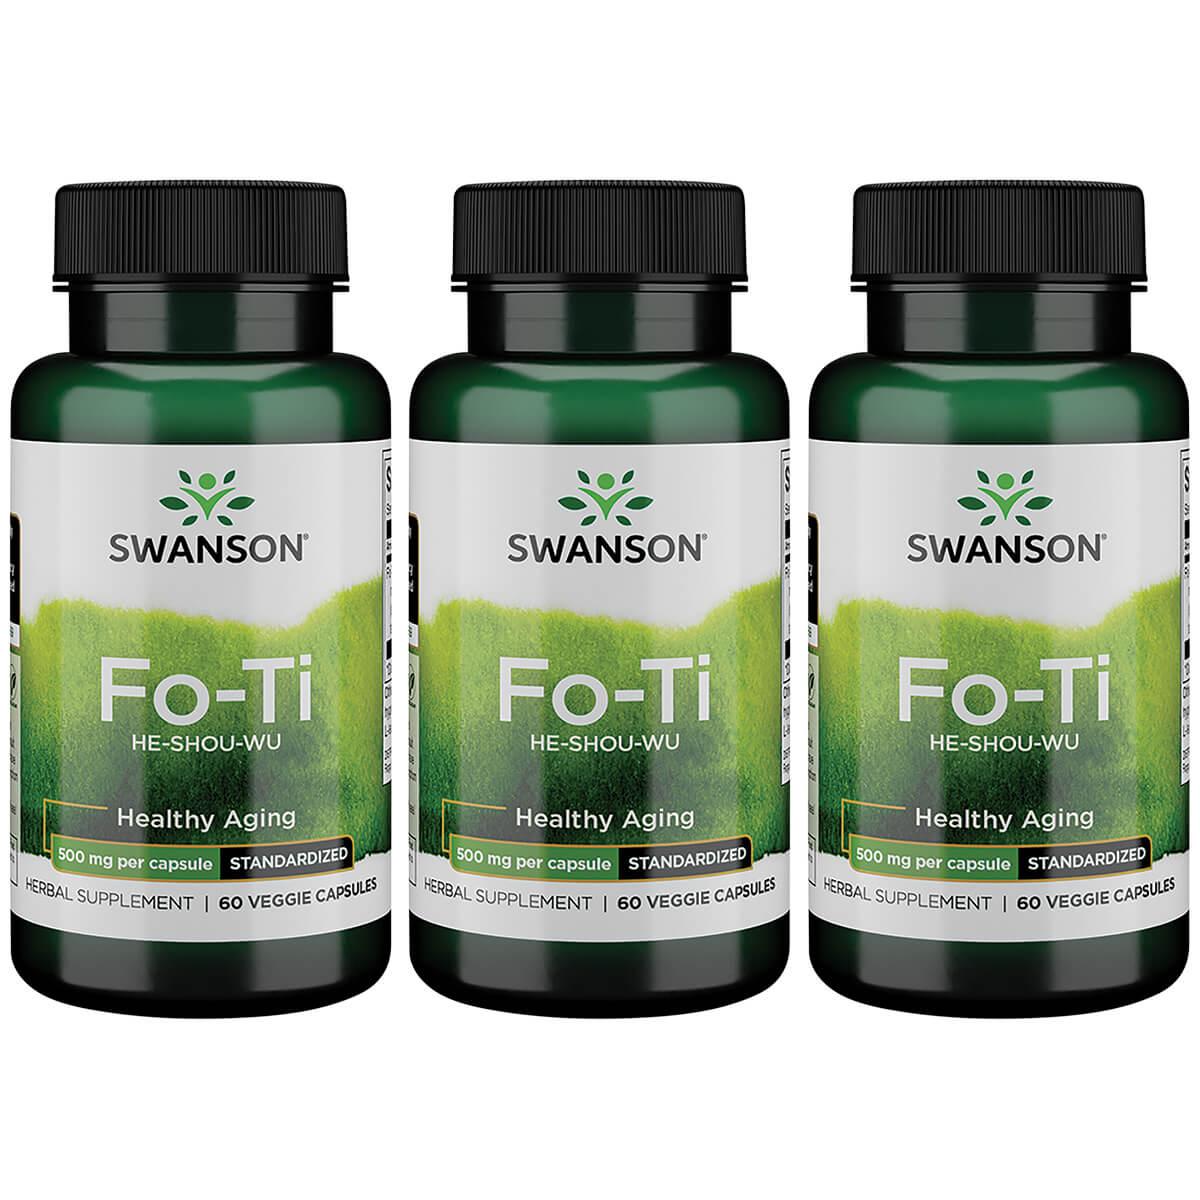 Swanson Superior Herbs Fo-Ti Extract He-Shou-Wu 3 Pack Vitamin 500 mg 60 Veg Caps Herbs and Supplements